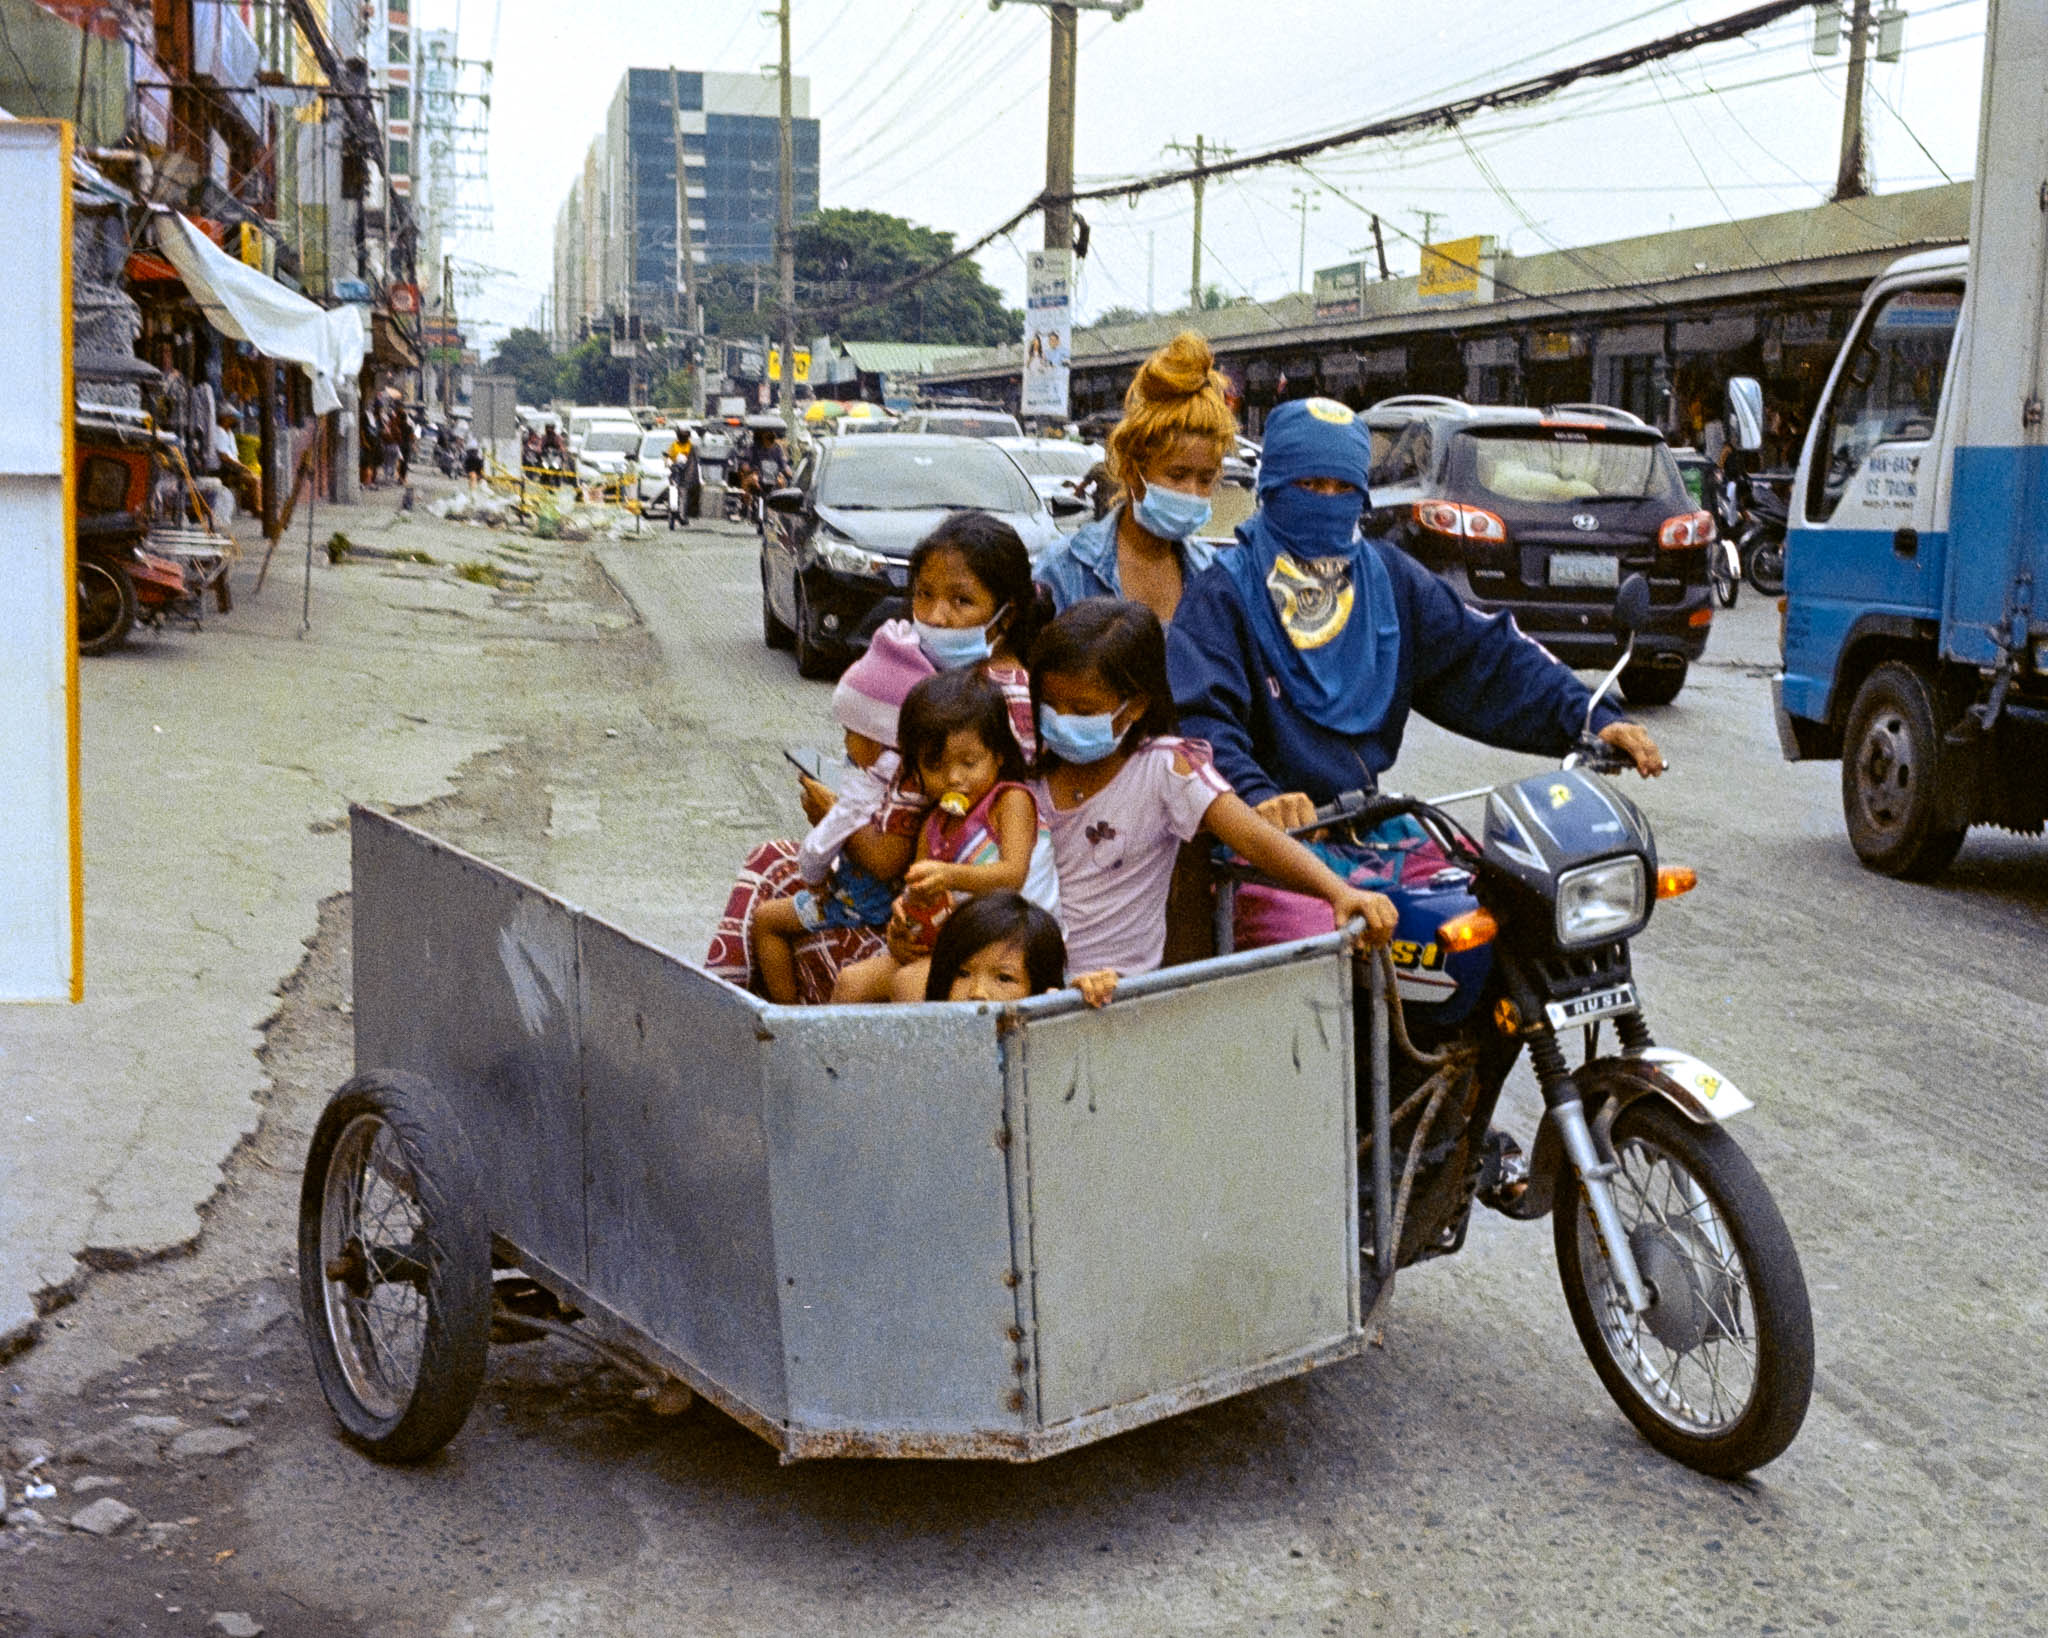 Children commuting in sidecar on busy urban street in developing city.